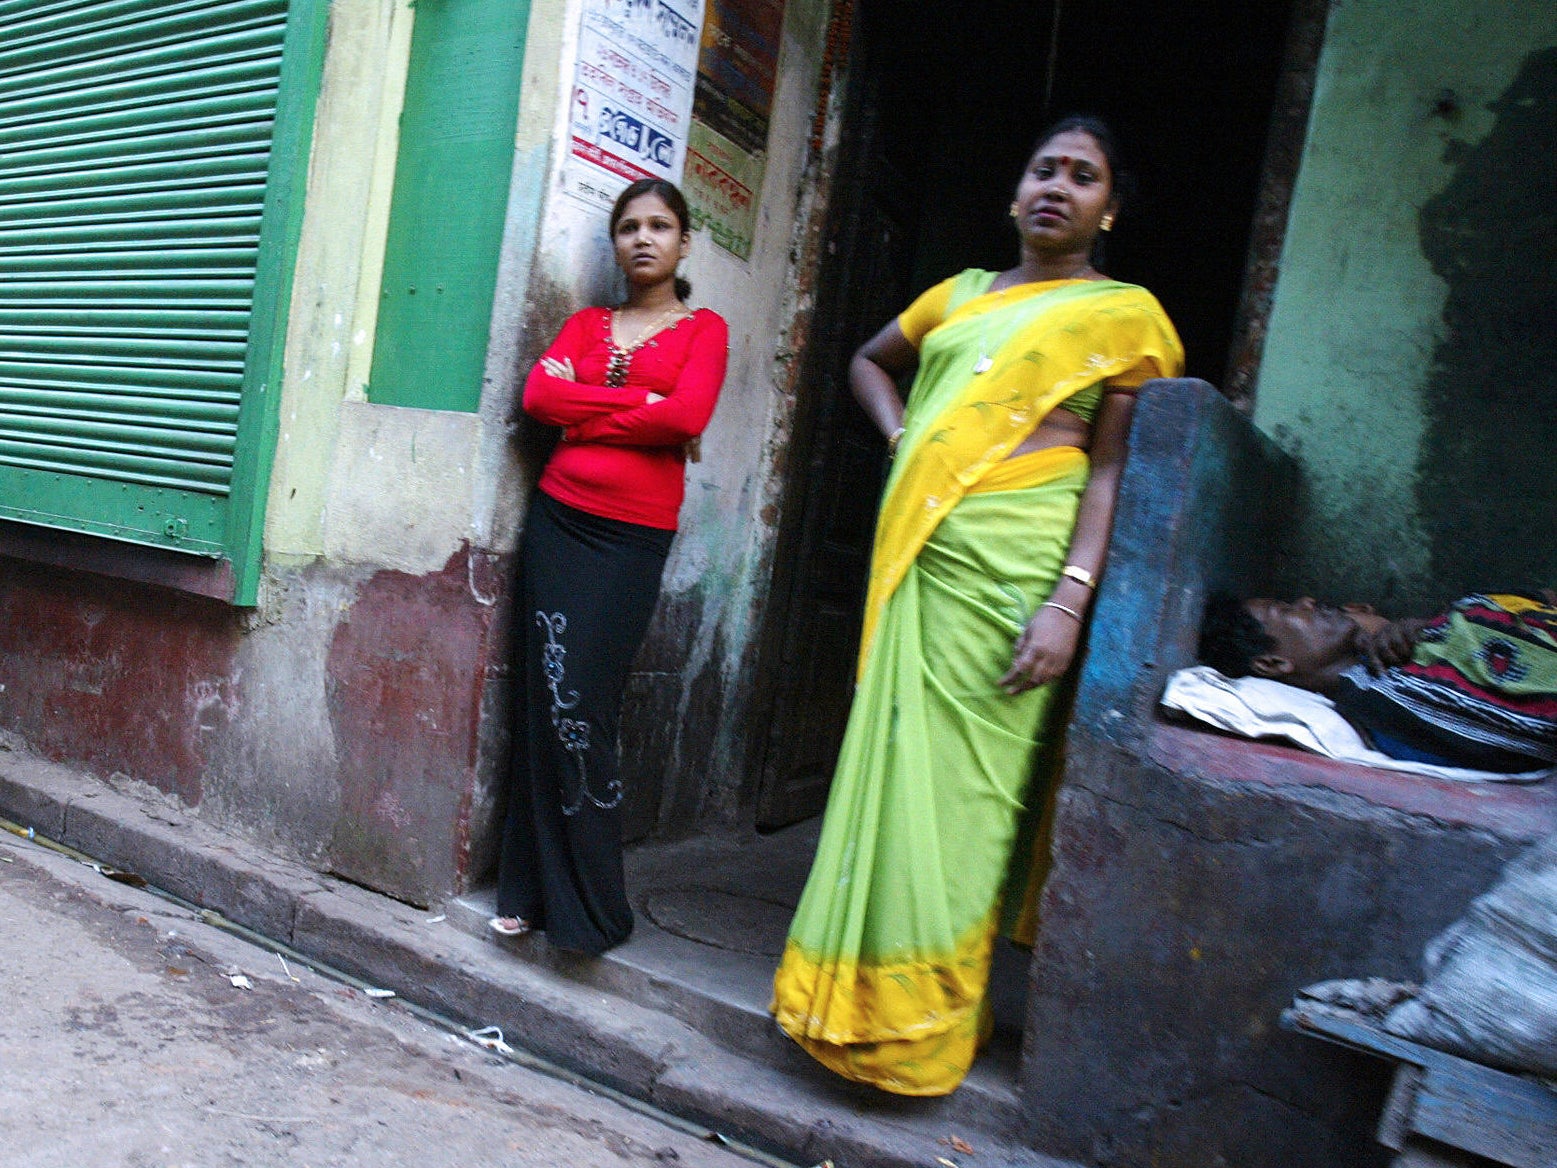 Sonagachi is Asia’s biggest red-light district, but Covid has made footfall dwindle